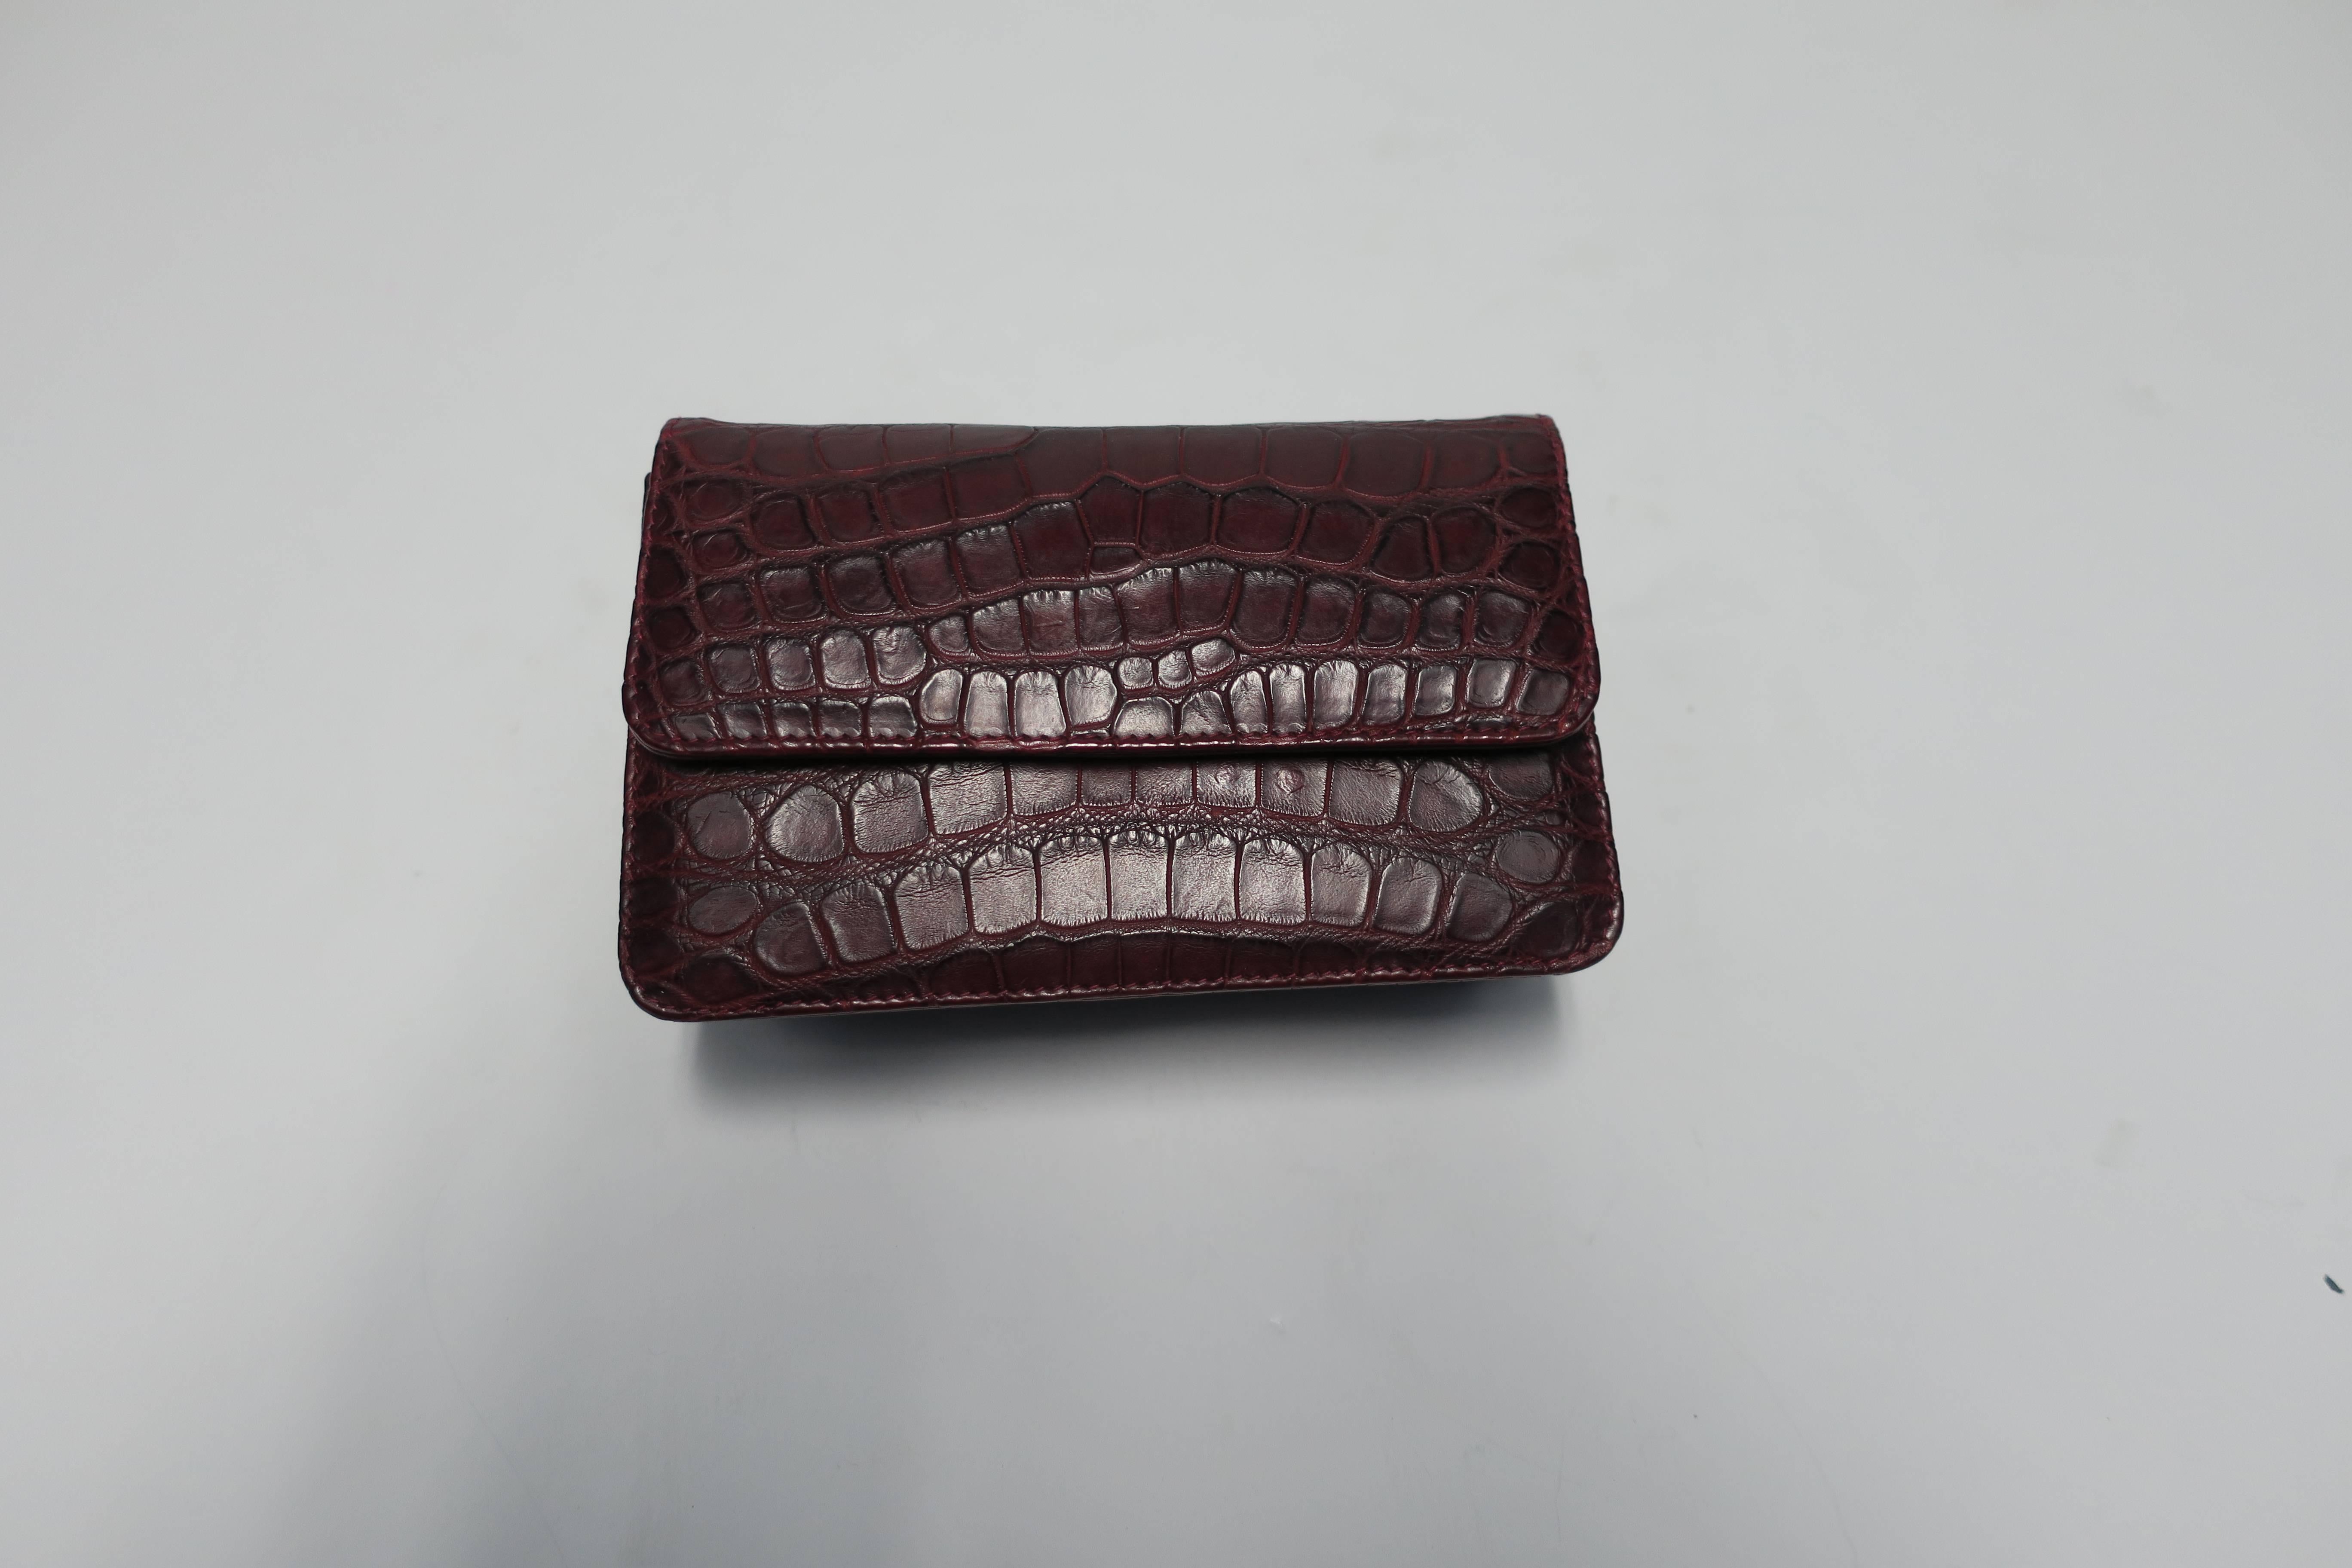 A beautiful Italian made leather crocodile embossed pattern handbag in burgundy red. Handbag can be used as a 'cross-body' bag by attaching it's removable strap, or used as a clutch. Bag has two compartments, plus a zip pouch area and a magnetic